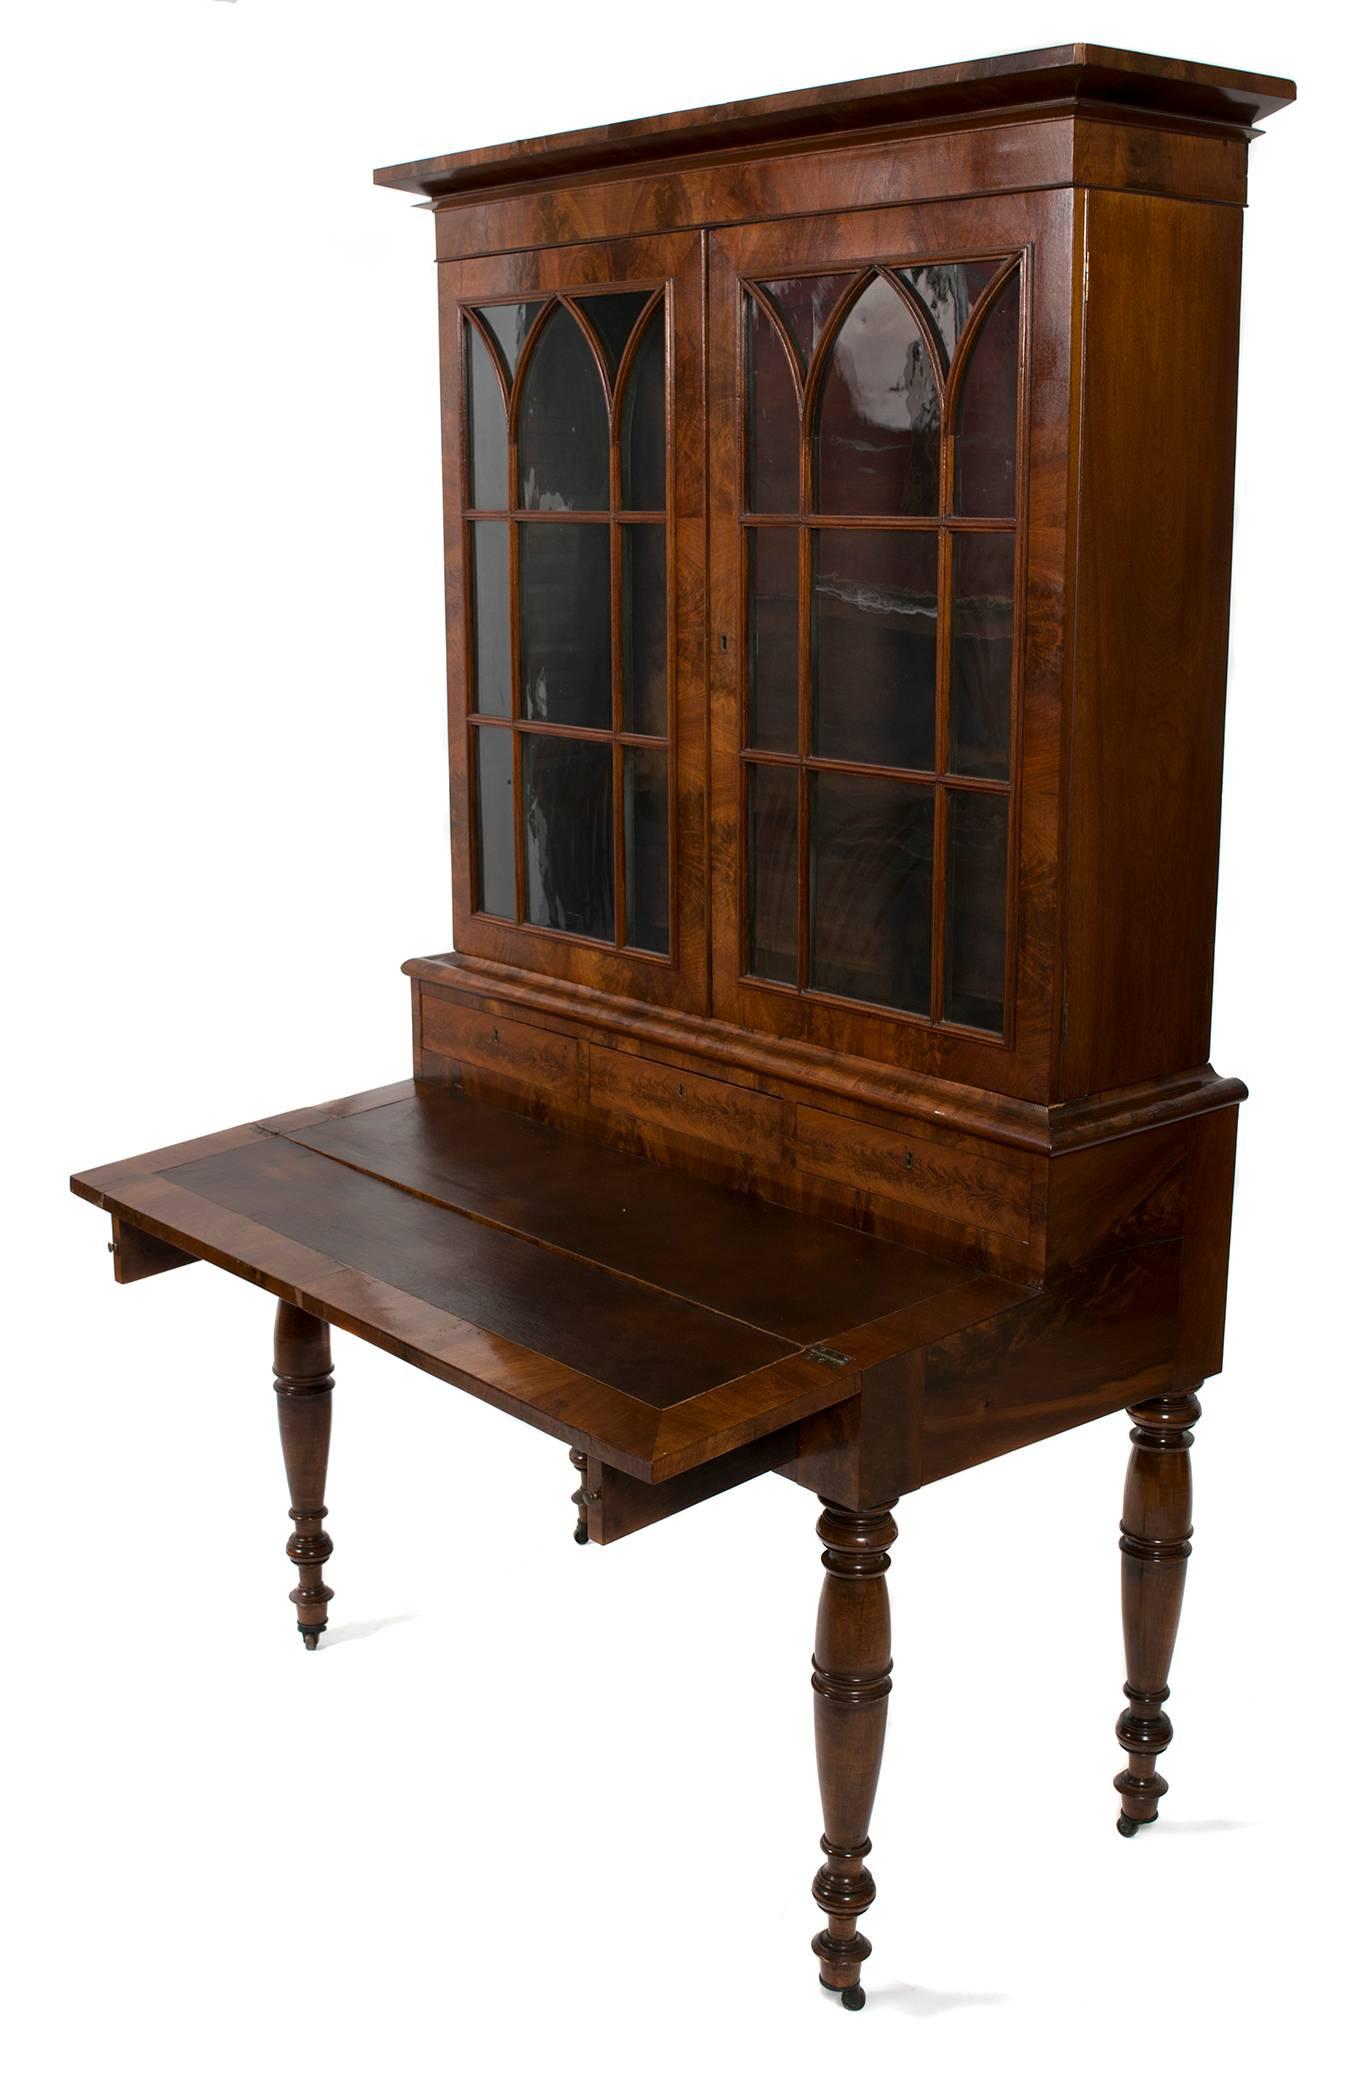 American mid-19th century mahogany secretary with bookcase, circa 1850-1860. Glass doors open to two shelves. Three small drawers at base of bookcase. One large drawer beneath hinged, leather top writing surface. Measures: Depth with drawer extended